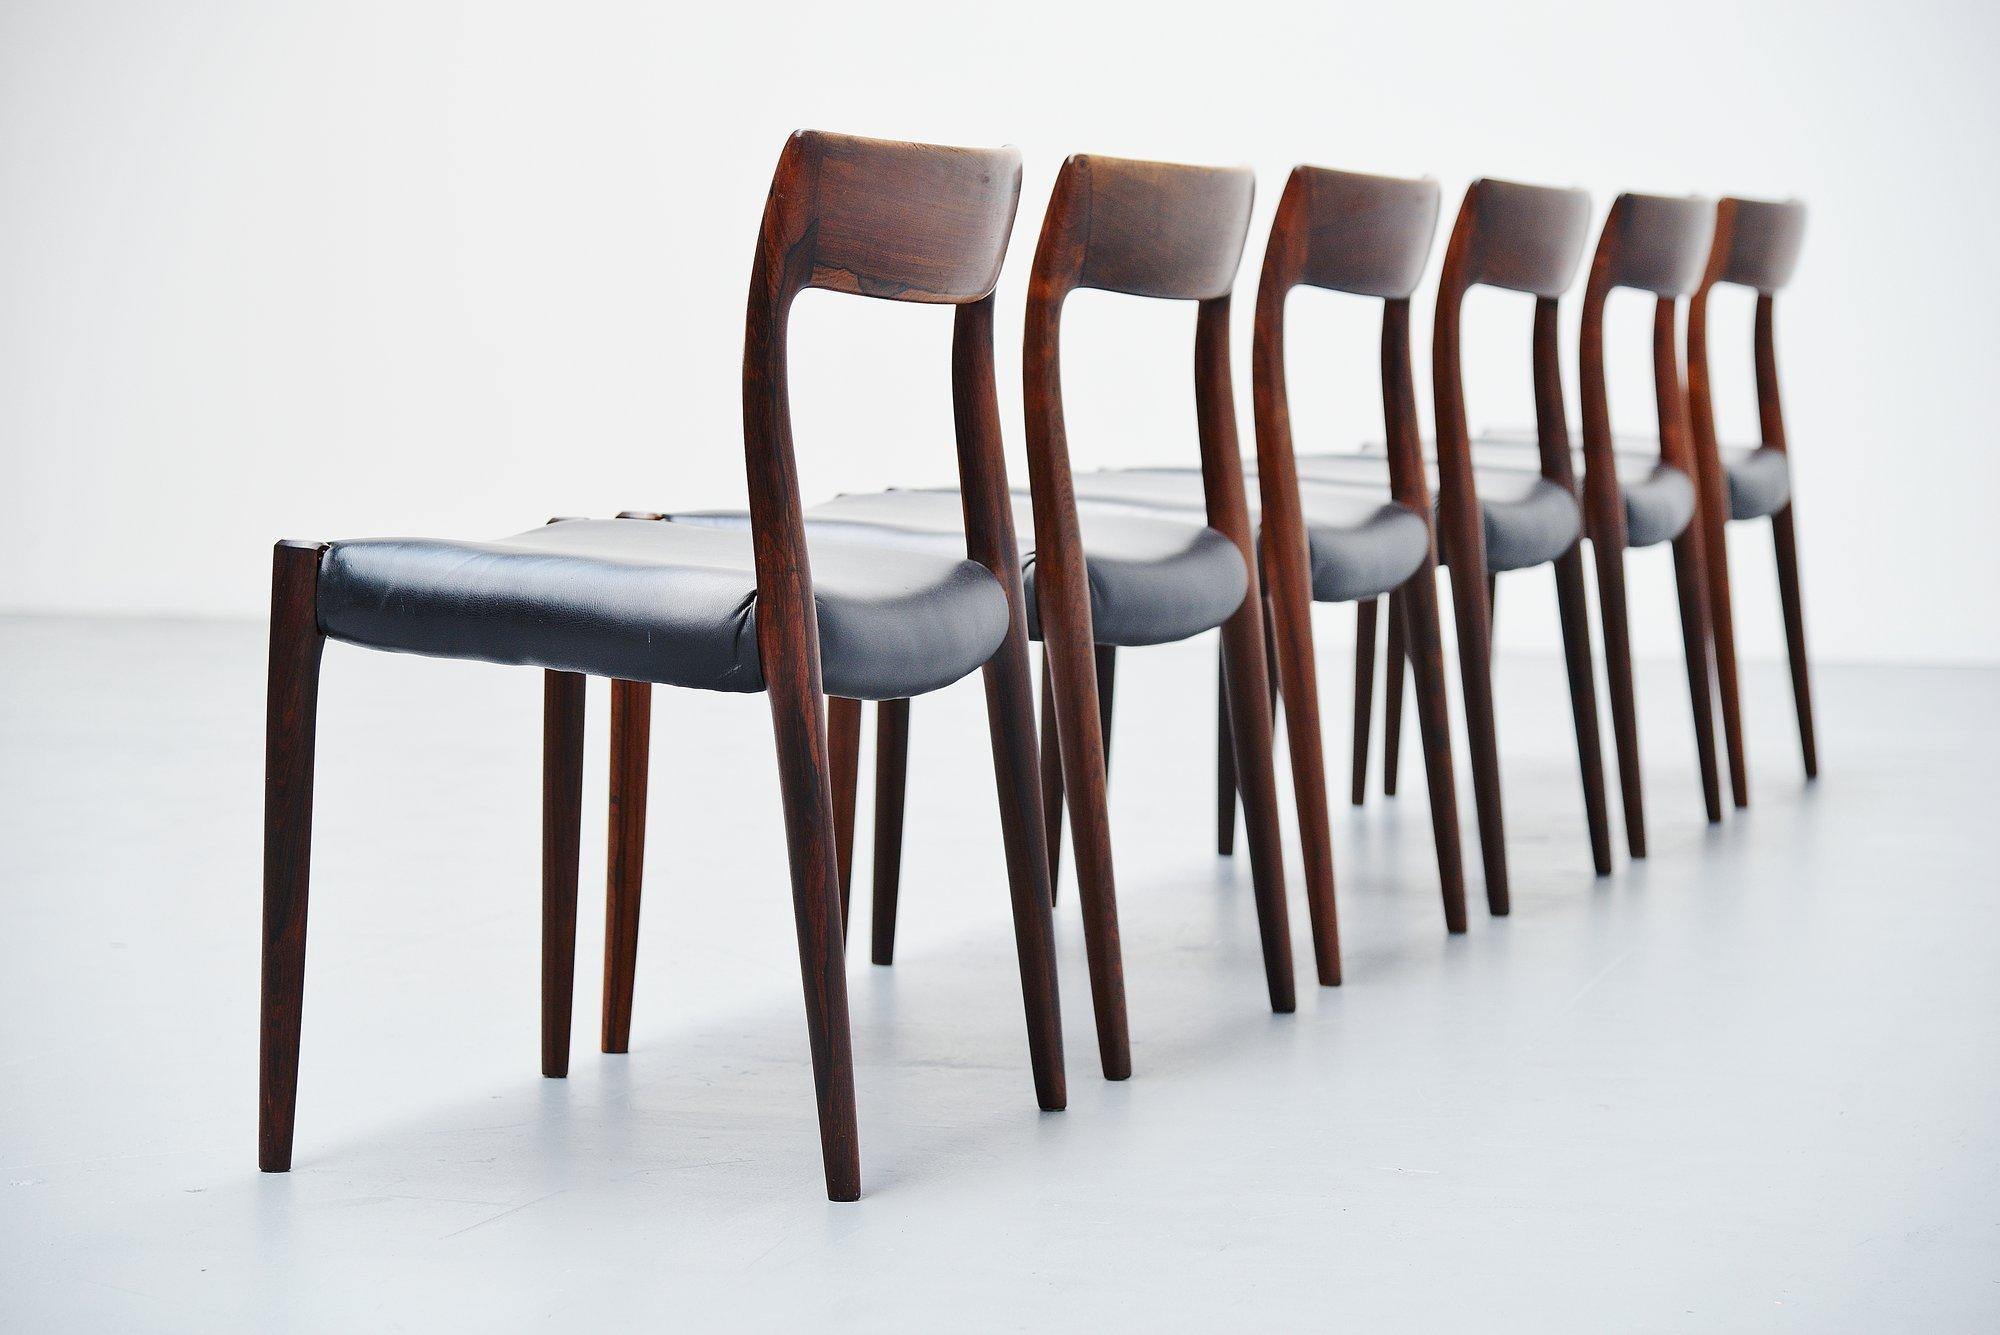 Very nice set of 6 rosewood dining chairs model 77 designed by Niels Moller and manufactured by J.L. Møller Mobelfabrik, Denmark 1959. These chairs are made of solid rosewood wood and have newly upholstered black leather seats that shows a very nice